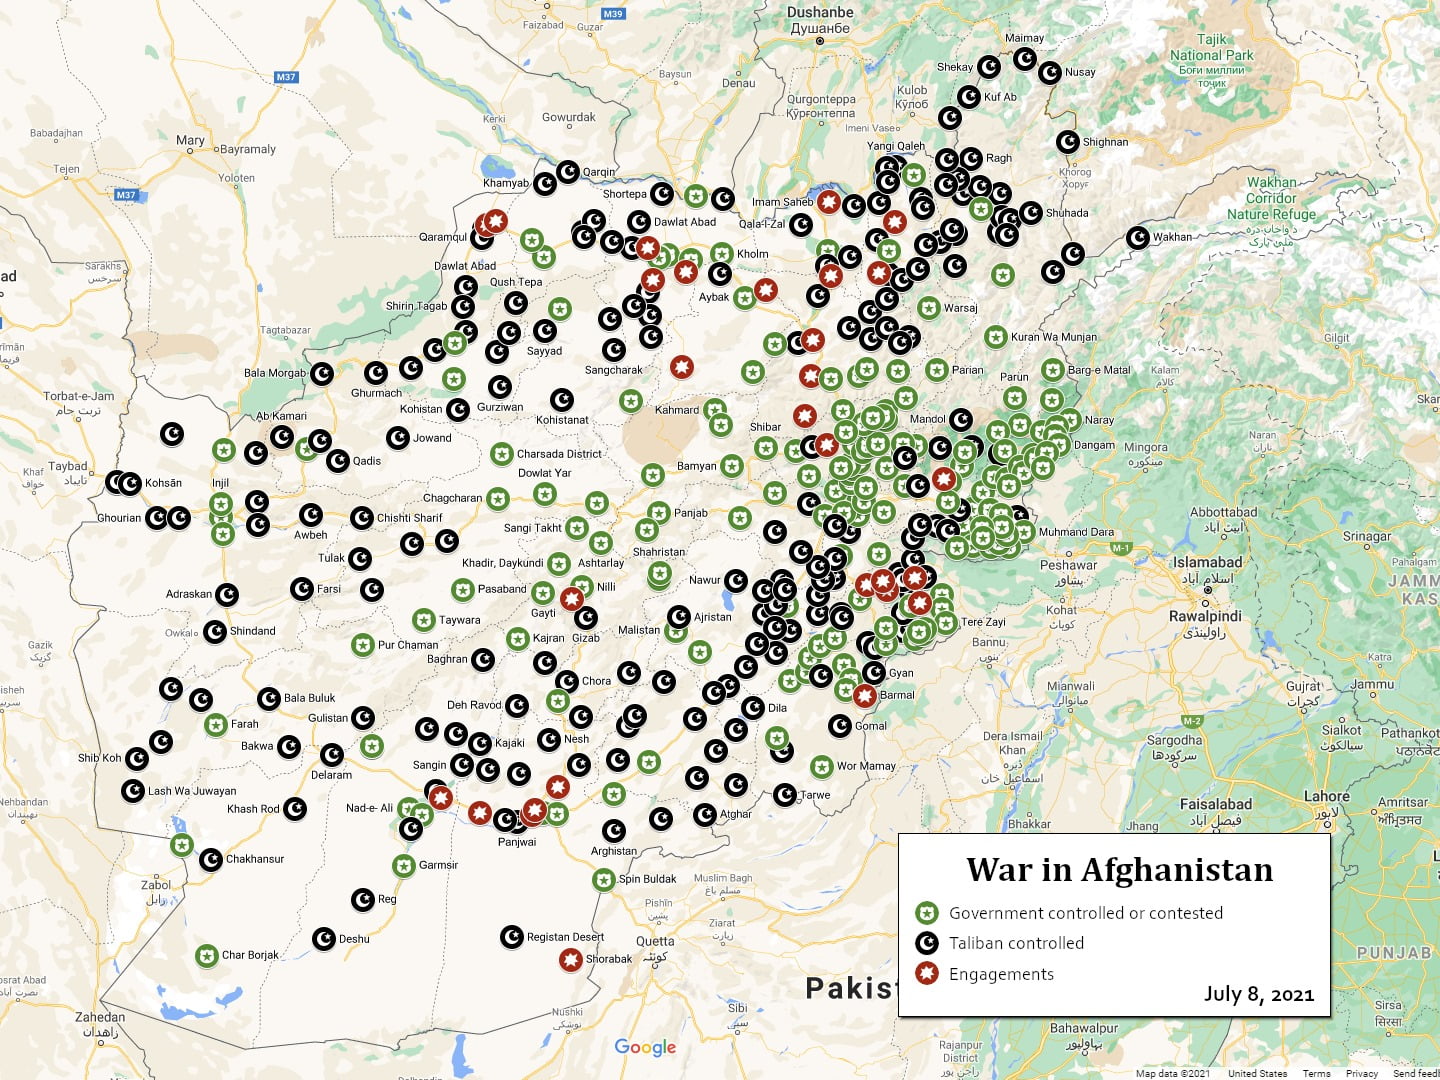 War in Afghanistan map for July 8, 2021